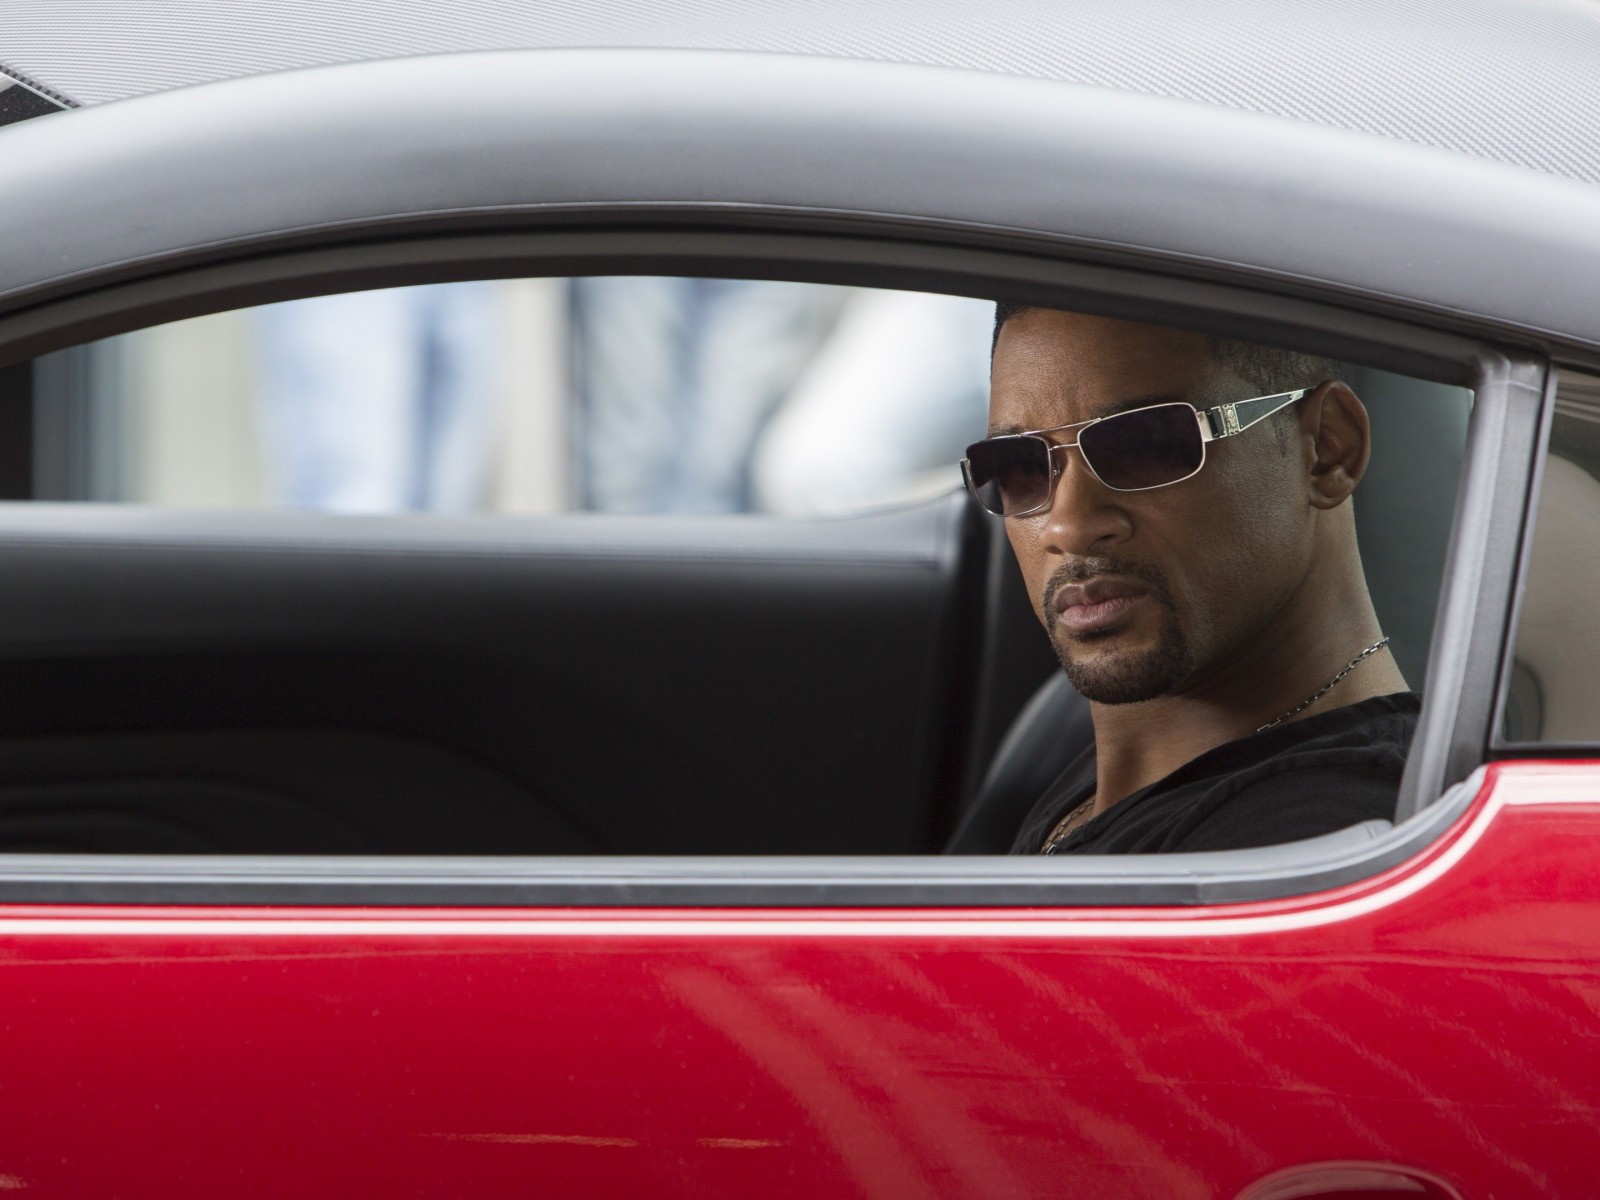 Will Smith at the shooting of "Focus" Wallpaper for Desktop 1600x1200